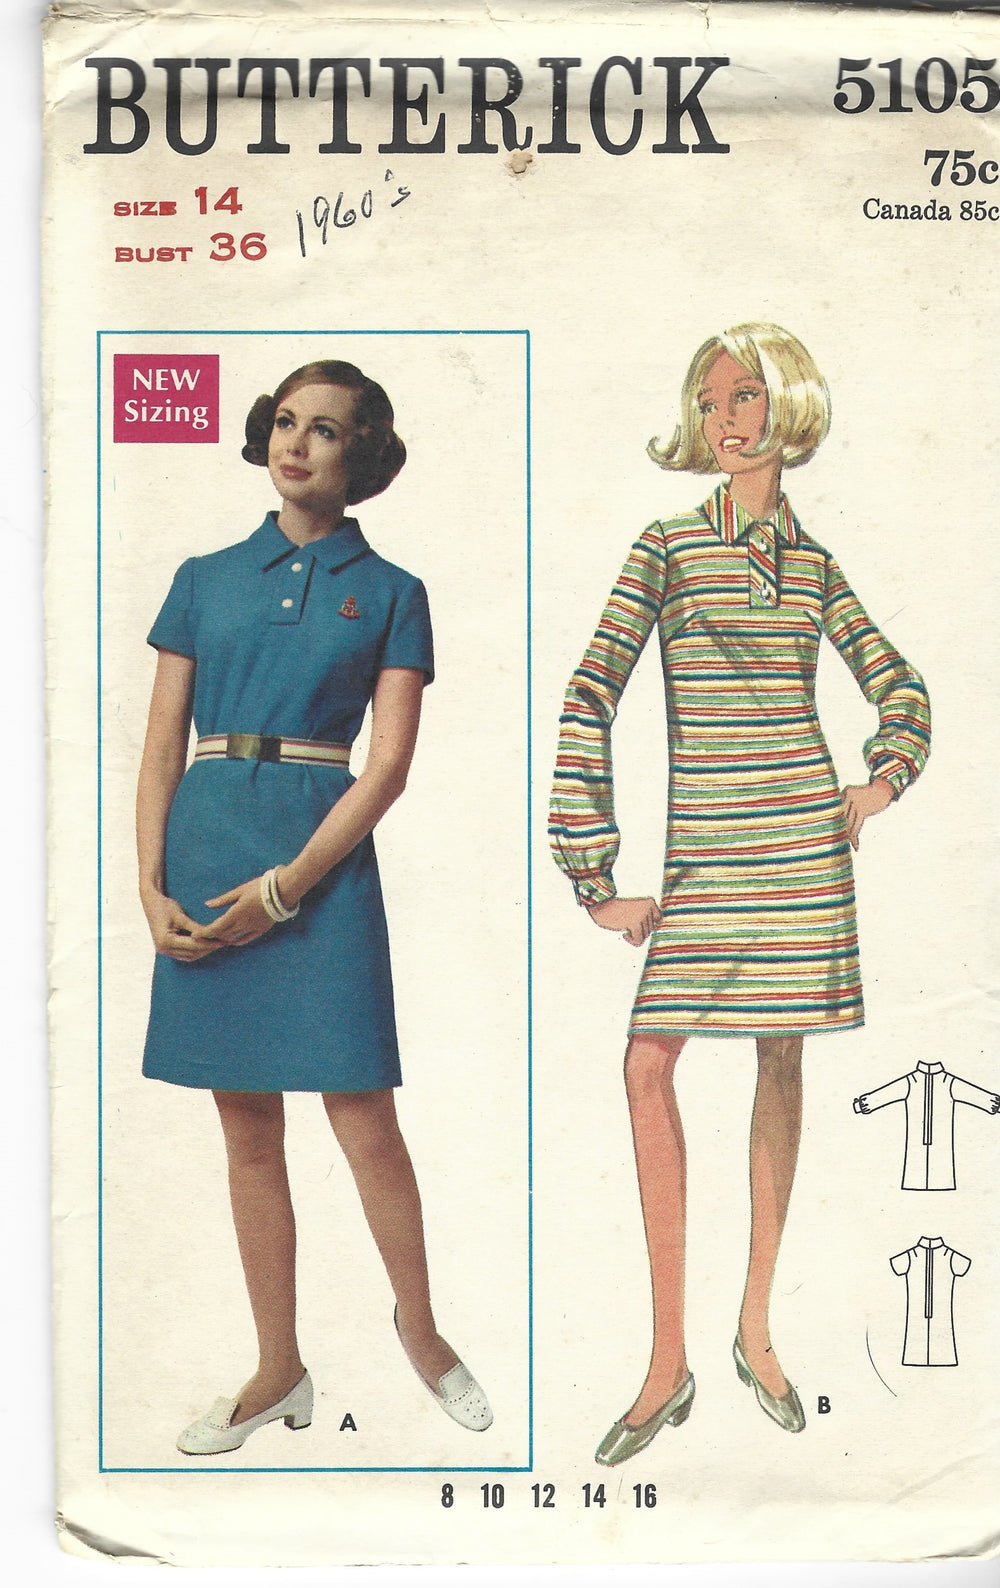 Butterick 5105 Ladies Slim Fitted One Piece Dress Vintage Sewing Pattern1960s